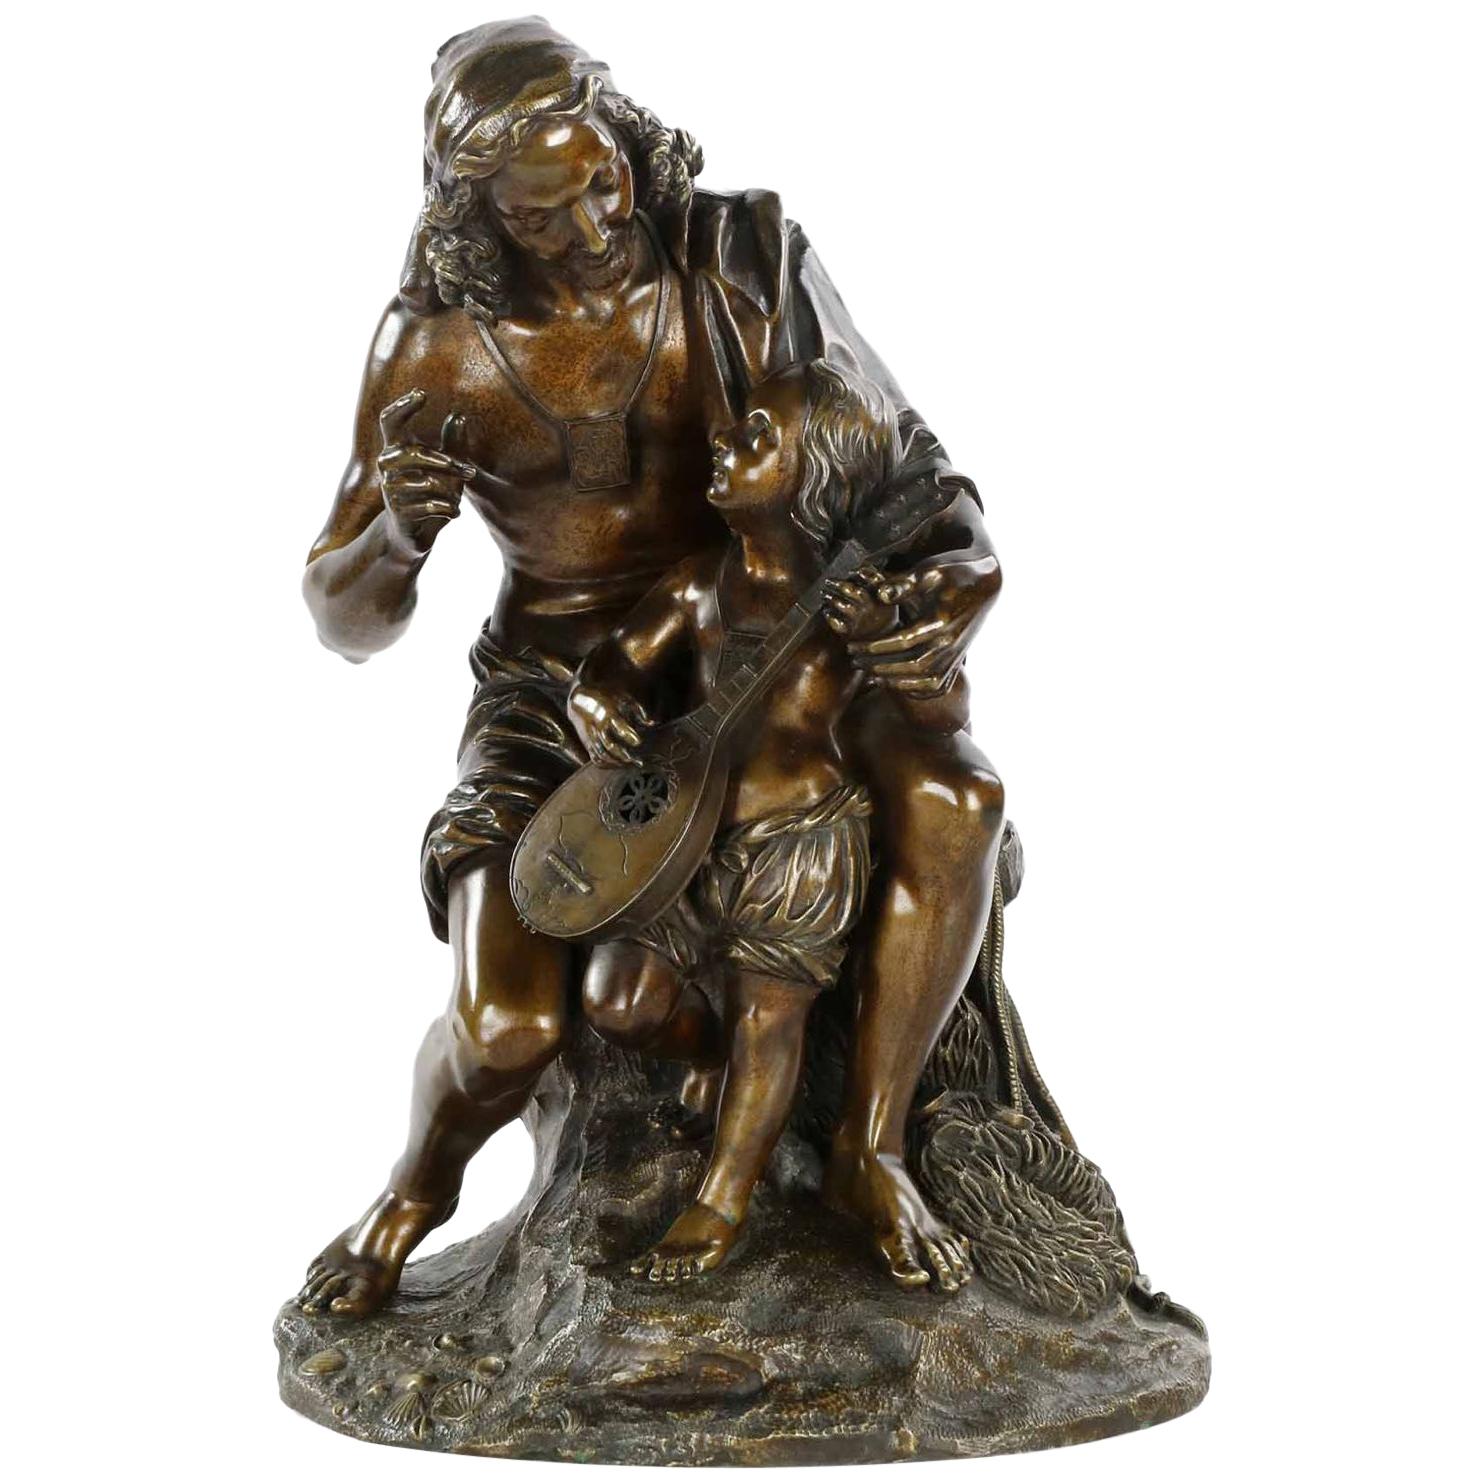 Exceptional Antique Bronze Sculpture of Fisherman and Son, 19th Century